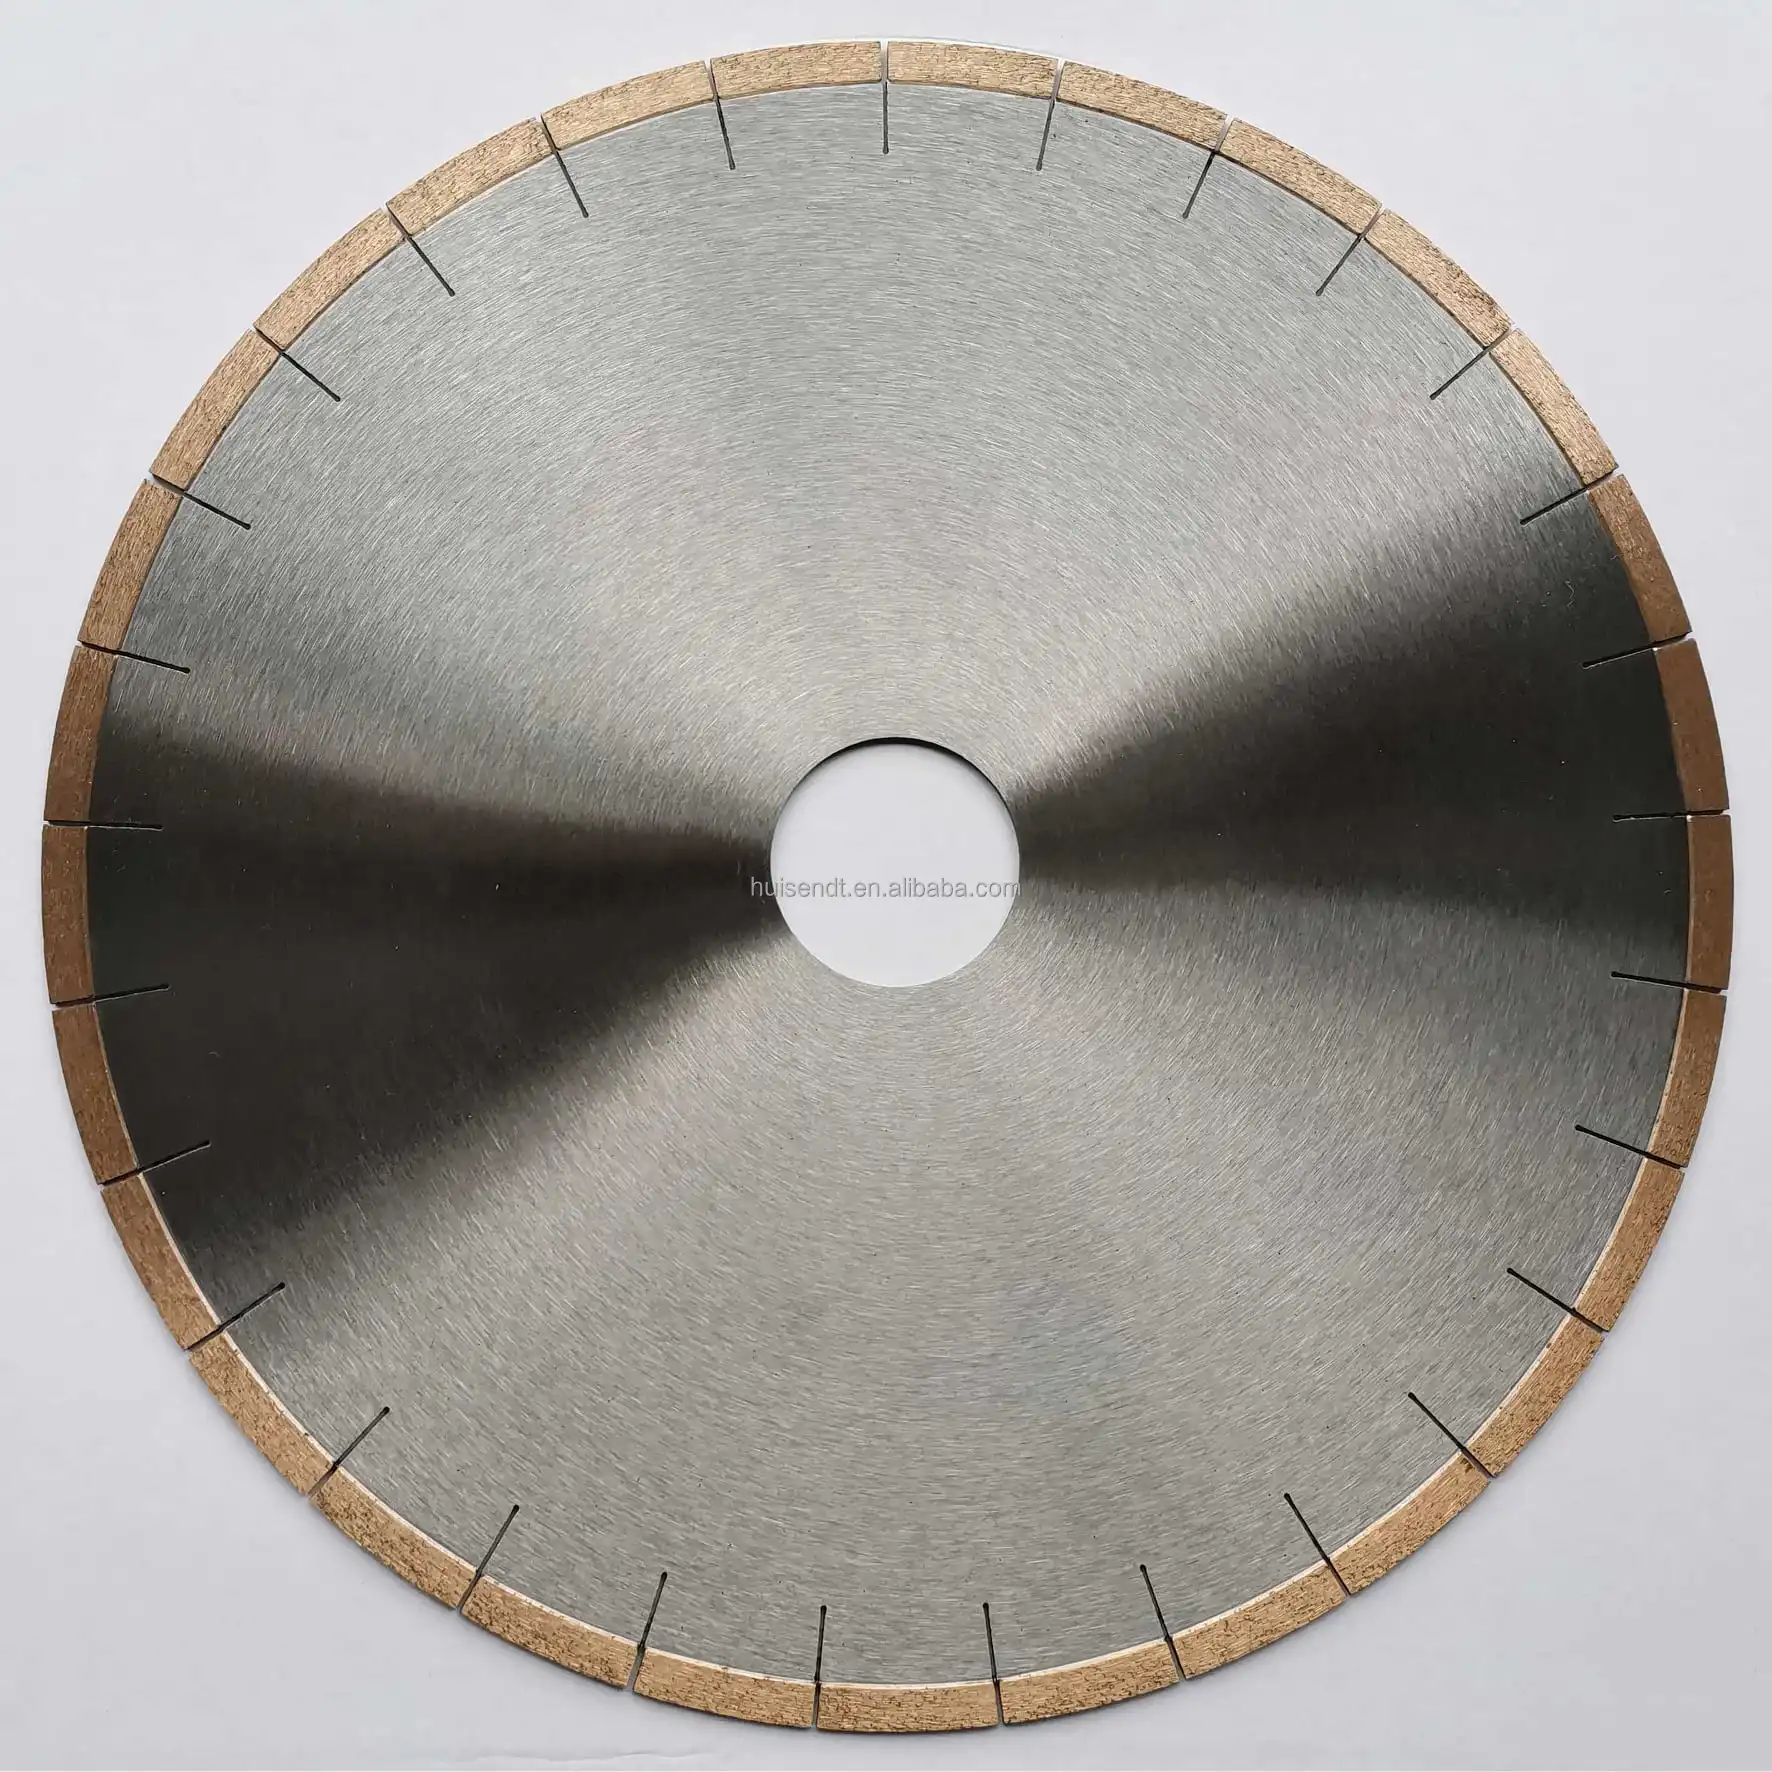 Wet dry cutting marble cutter power tools diamond saw blade